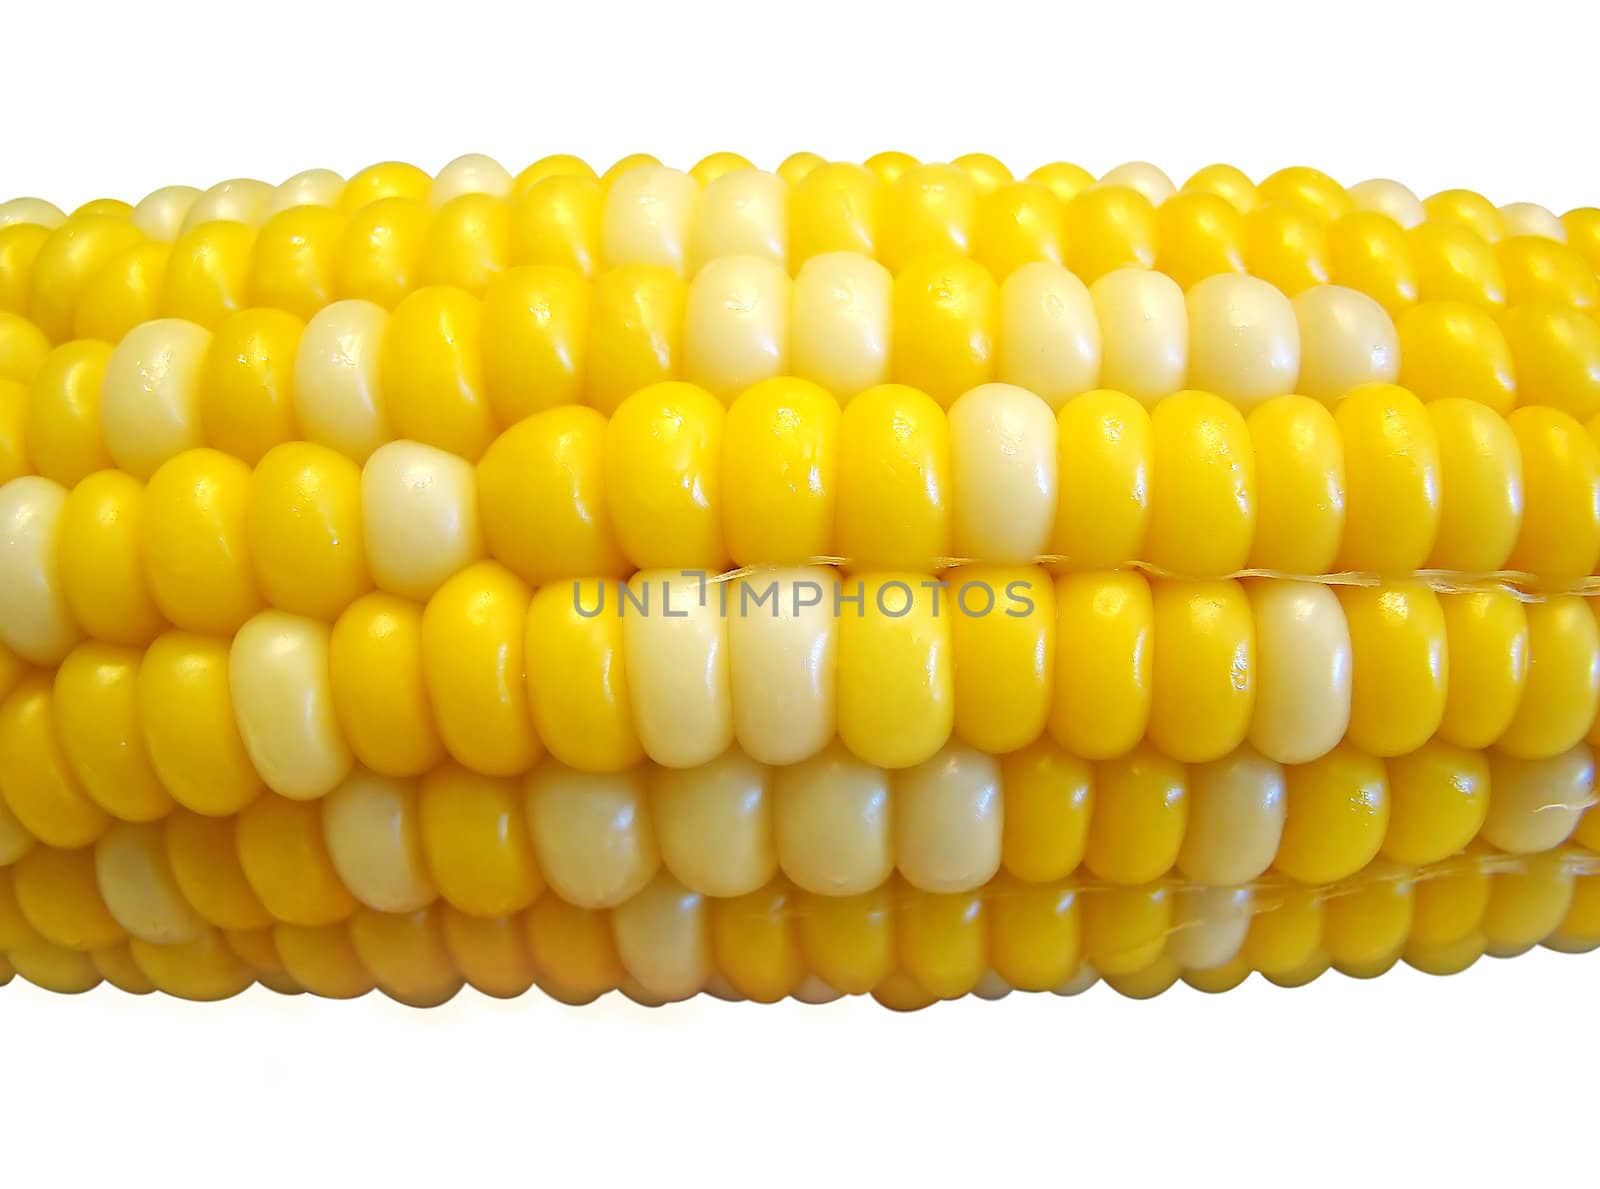 Corn on the cob isolated by Mirage3